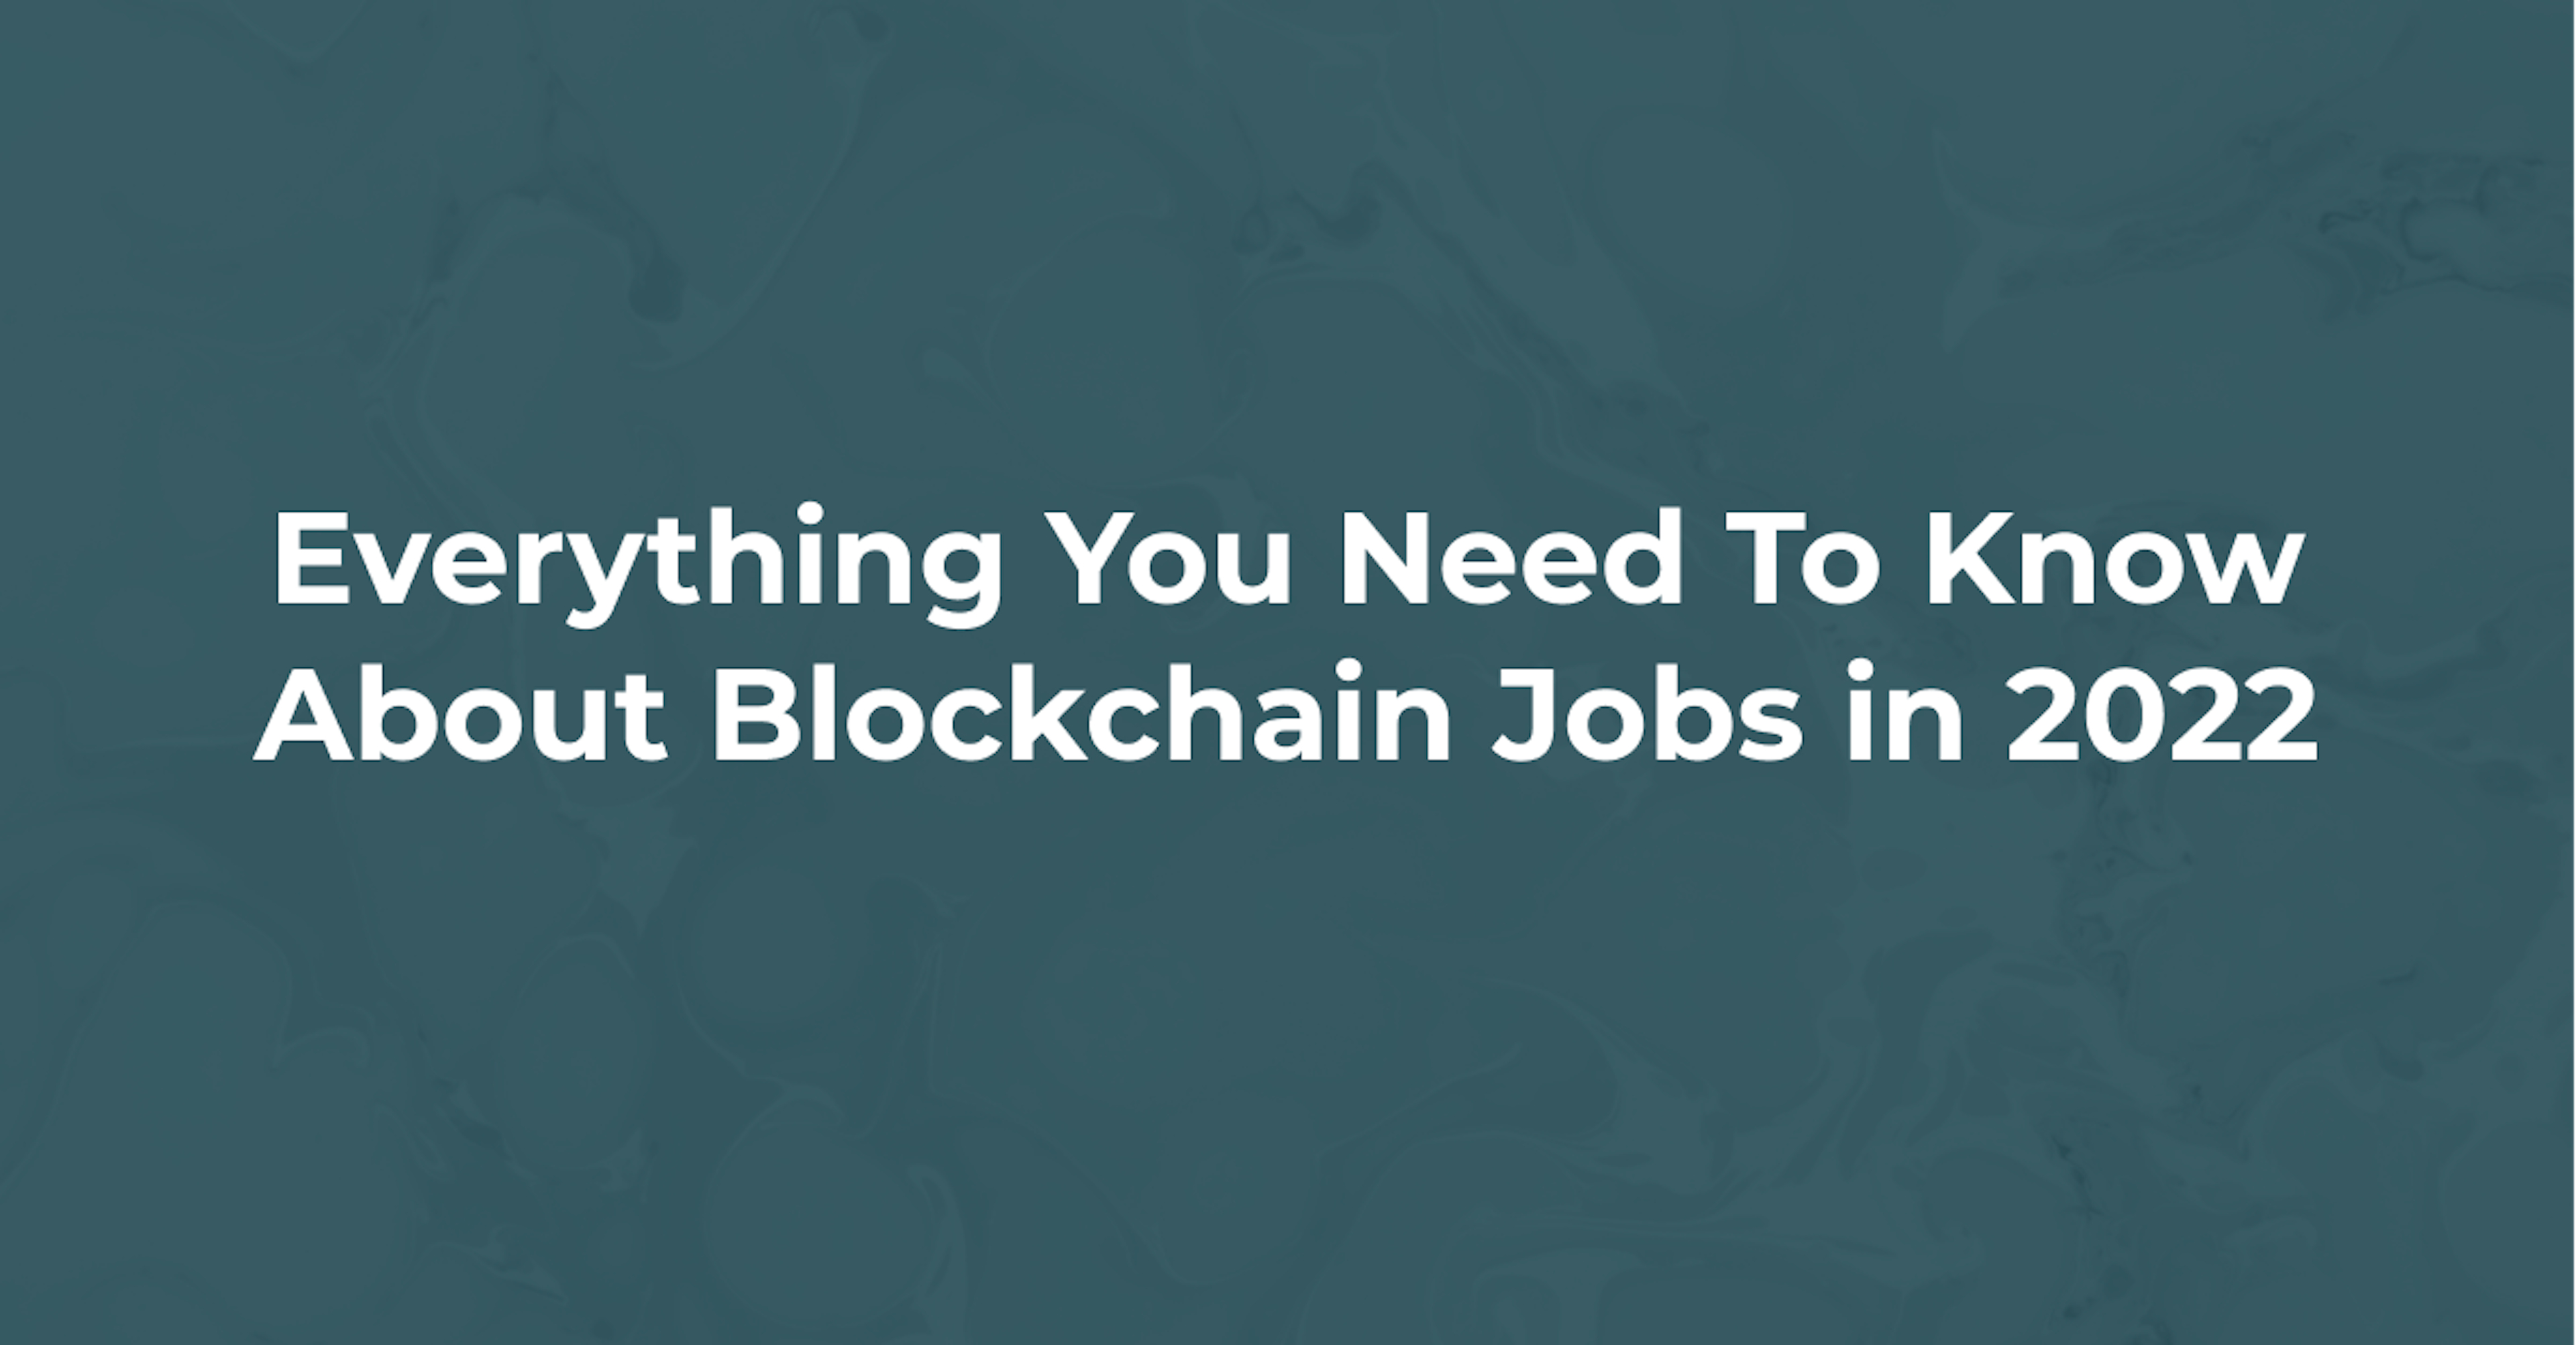 Everything You Need To Know About Blockchain Jobs in 2022 | Blockchain Works